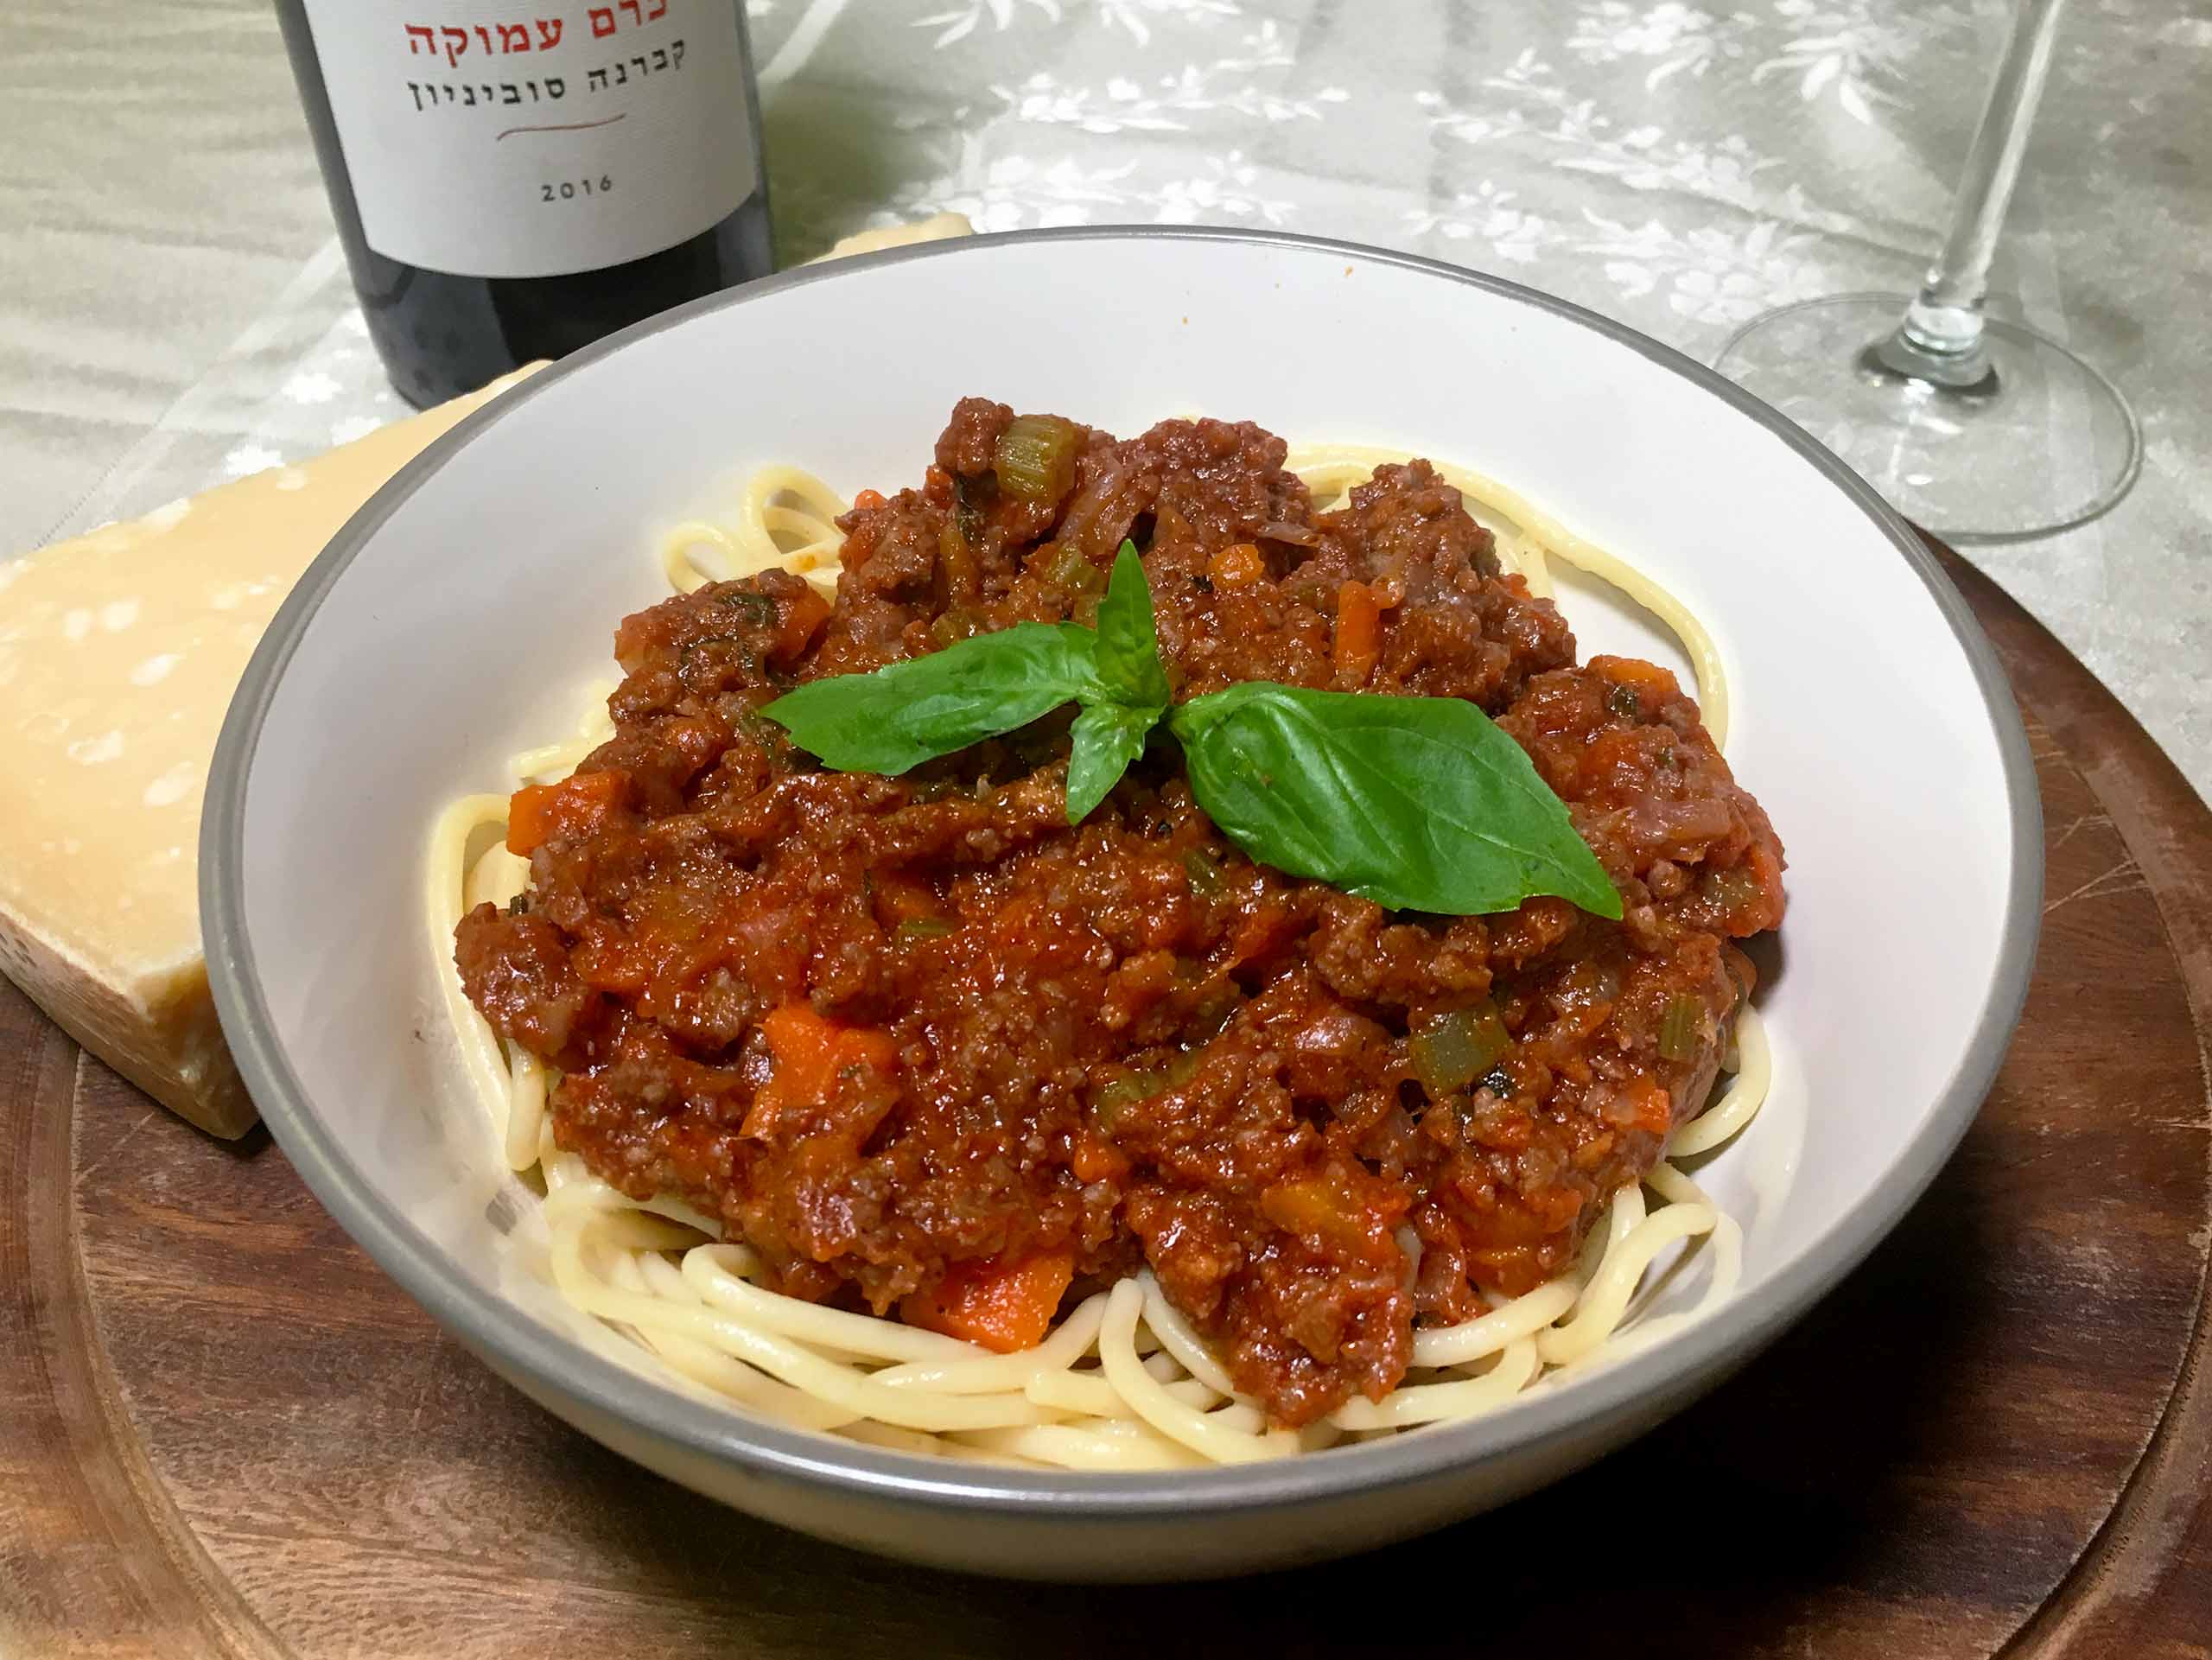 Pasta In Bolognese Sauce Just Like the Italian make